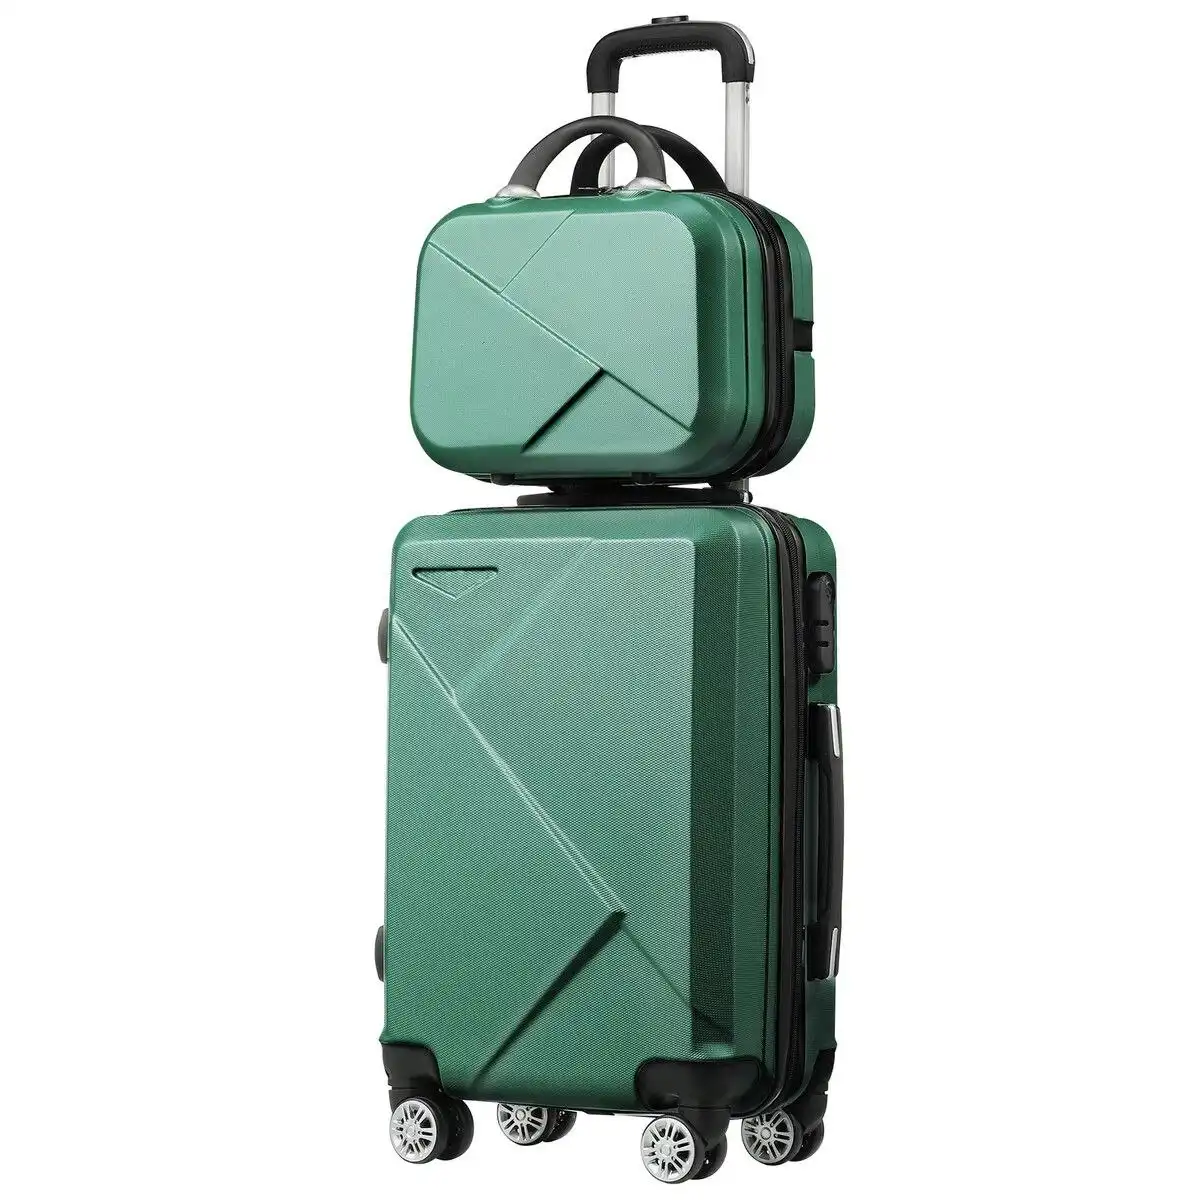 Buon Viaggio 2 Piece Luggage Set Carry On Travel Hard Shell Suitcases Traveller Travelling Rolling Trolley Checked Vanity Bag Lightweight